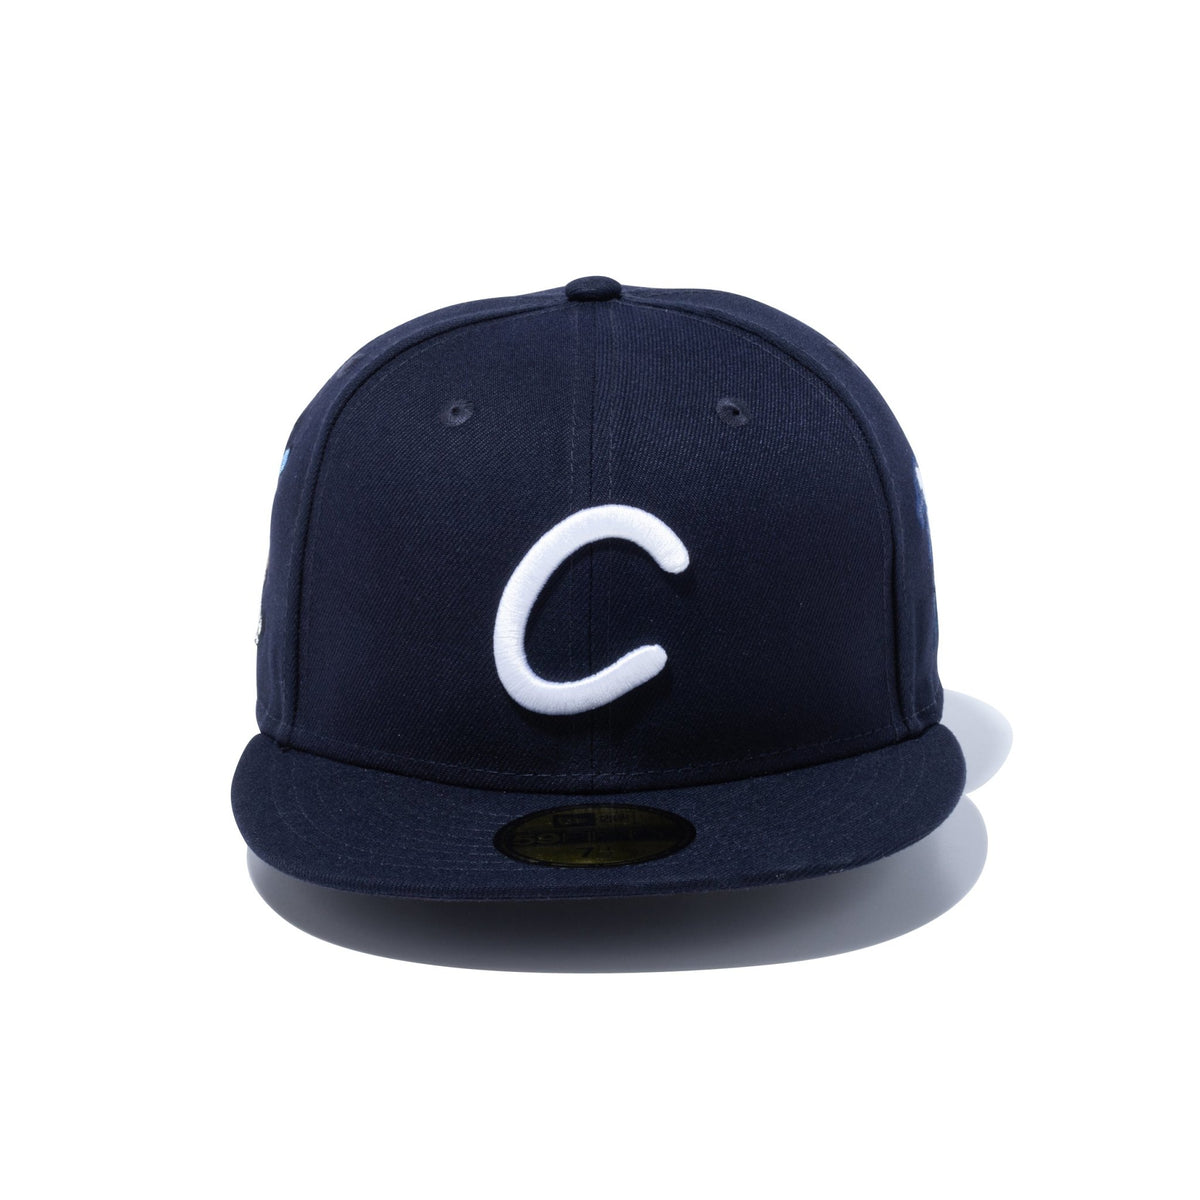 59FIFTY COIN PARKING DELIVERY Cロゴ ネイビー